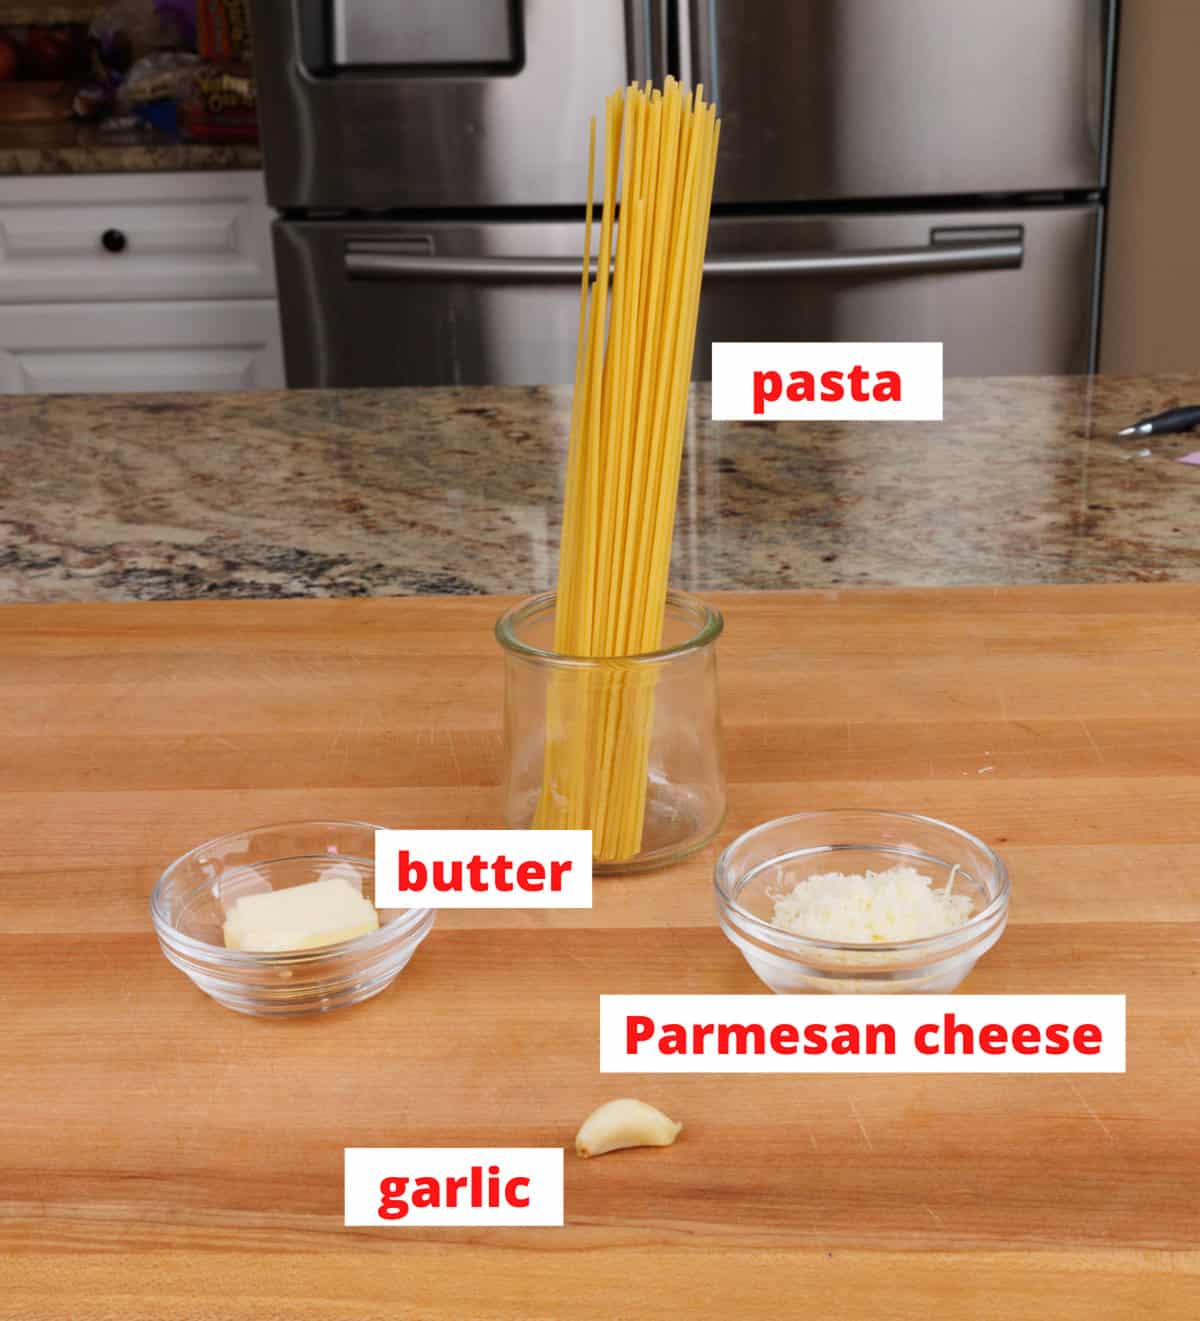 buttered noodles ingredients on a wooden cutting board in a kitchen.